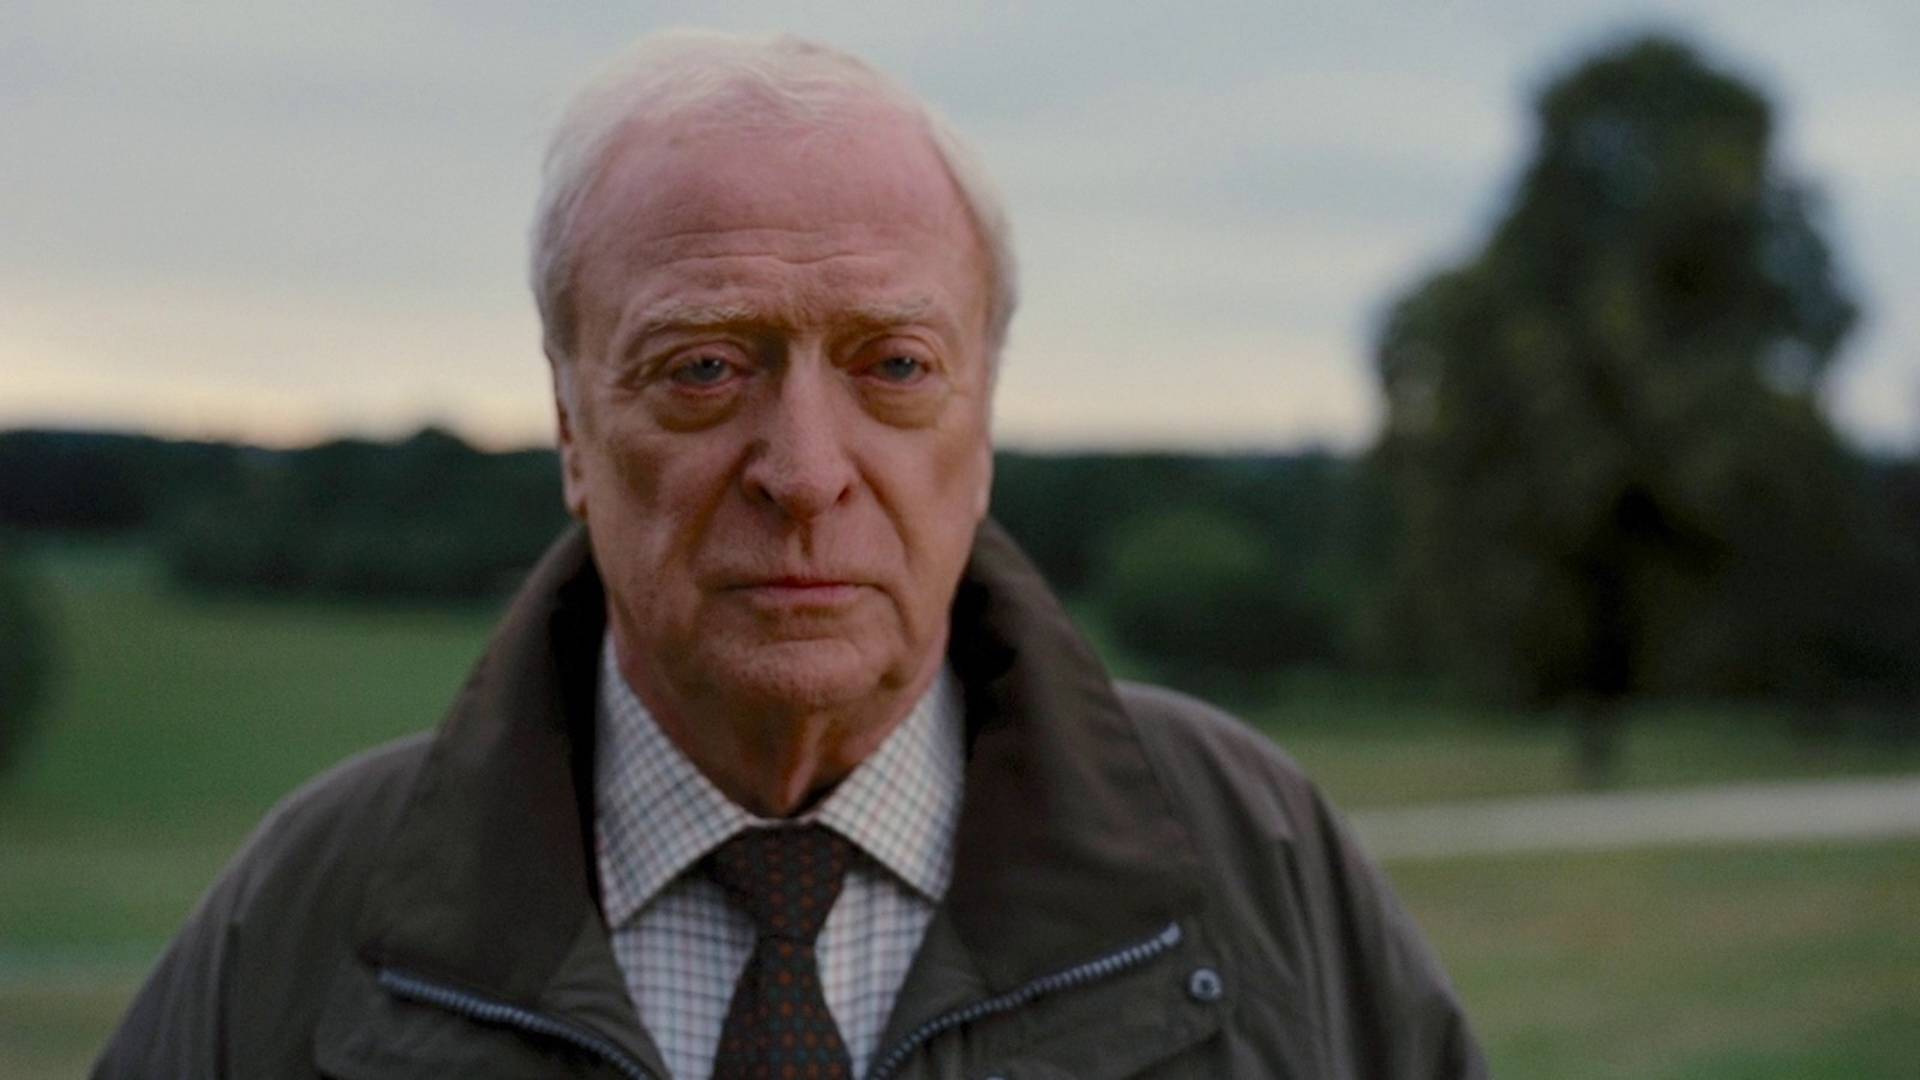 Michael Caine says he's sort of retired already